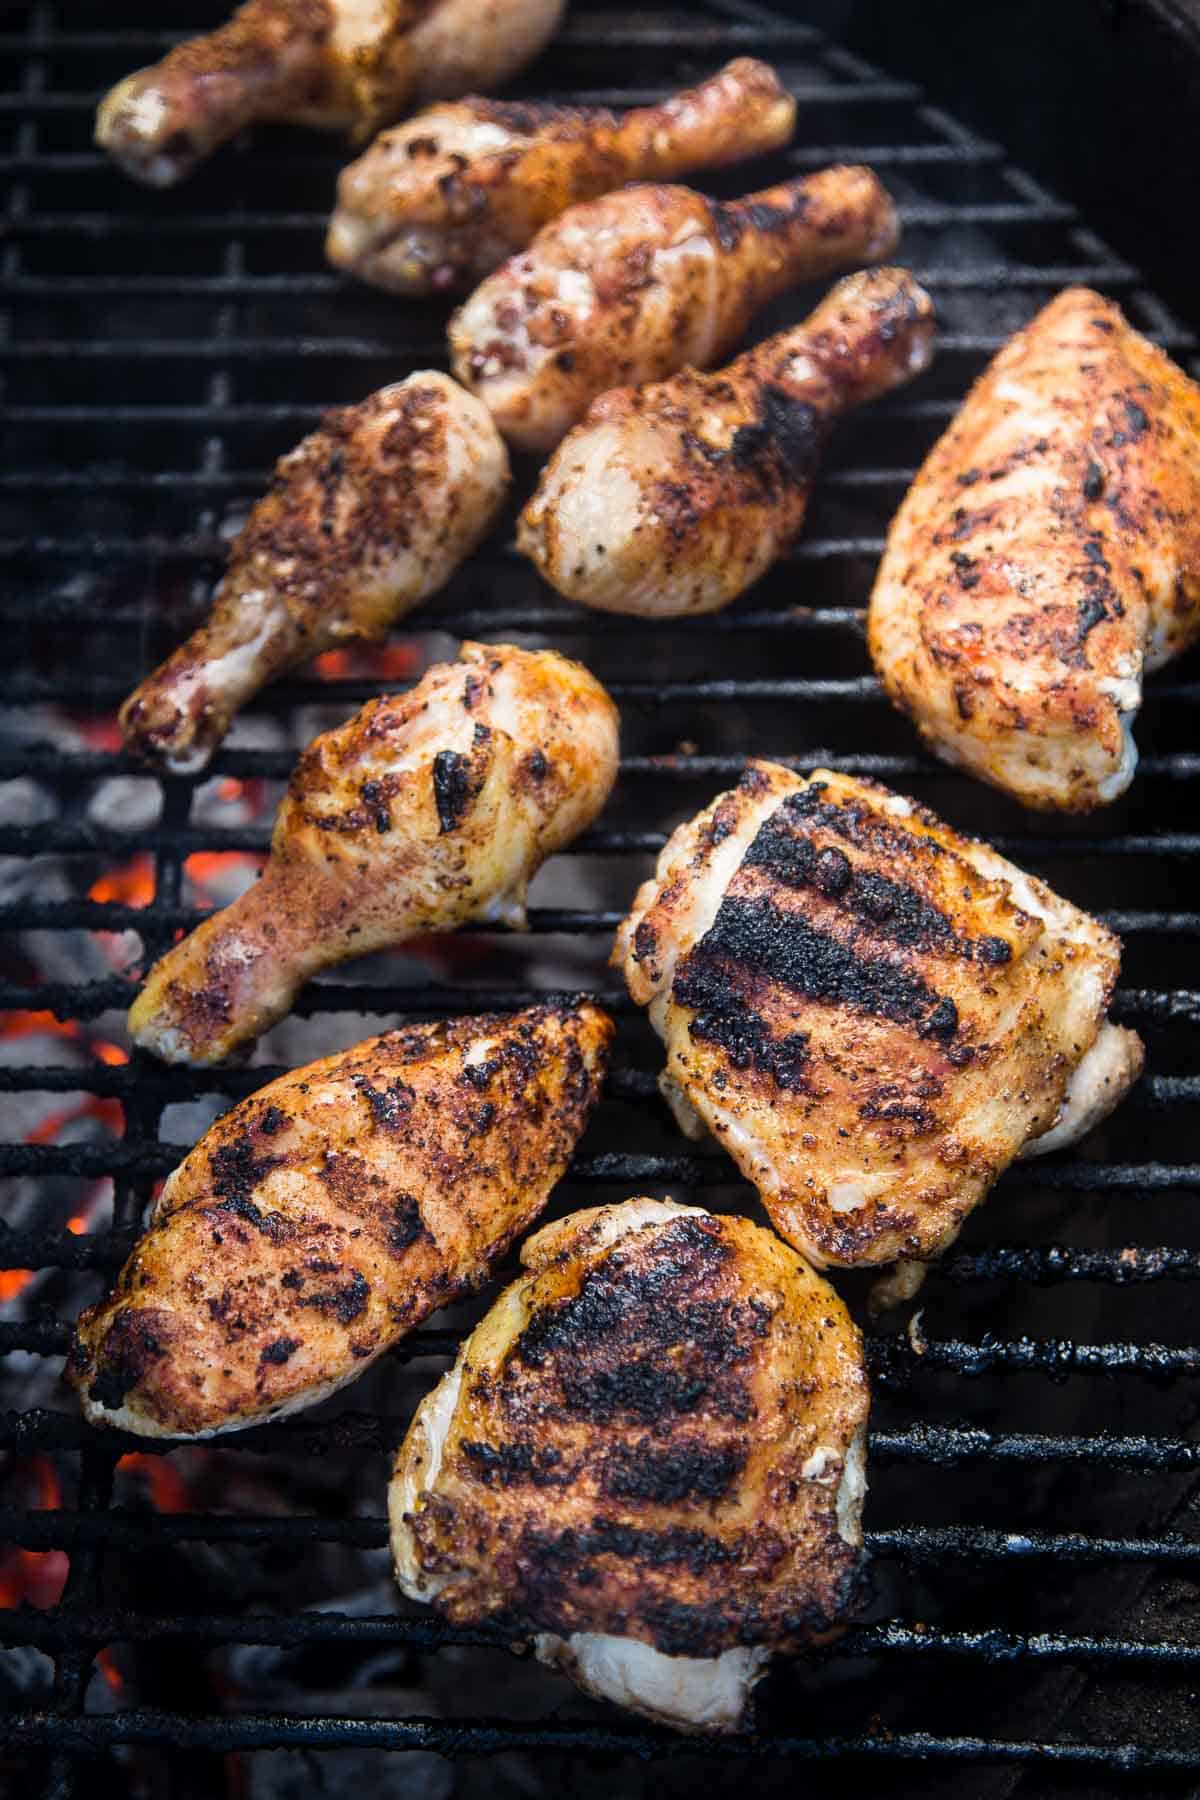 Grilling chicken pieces over direct heat